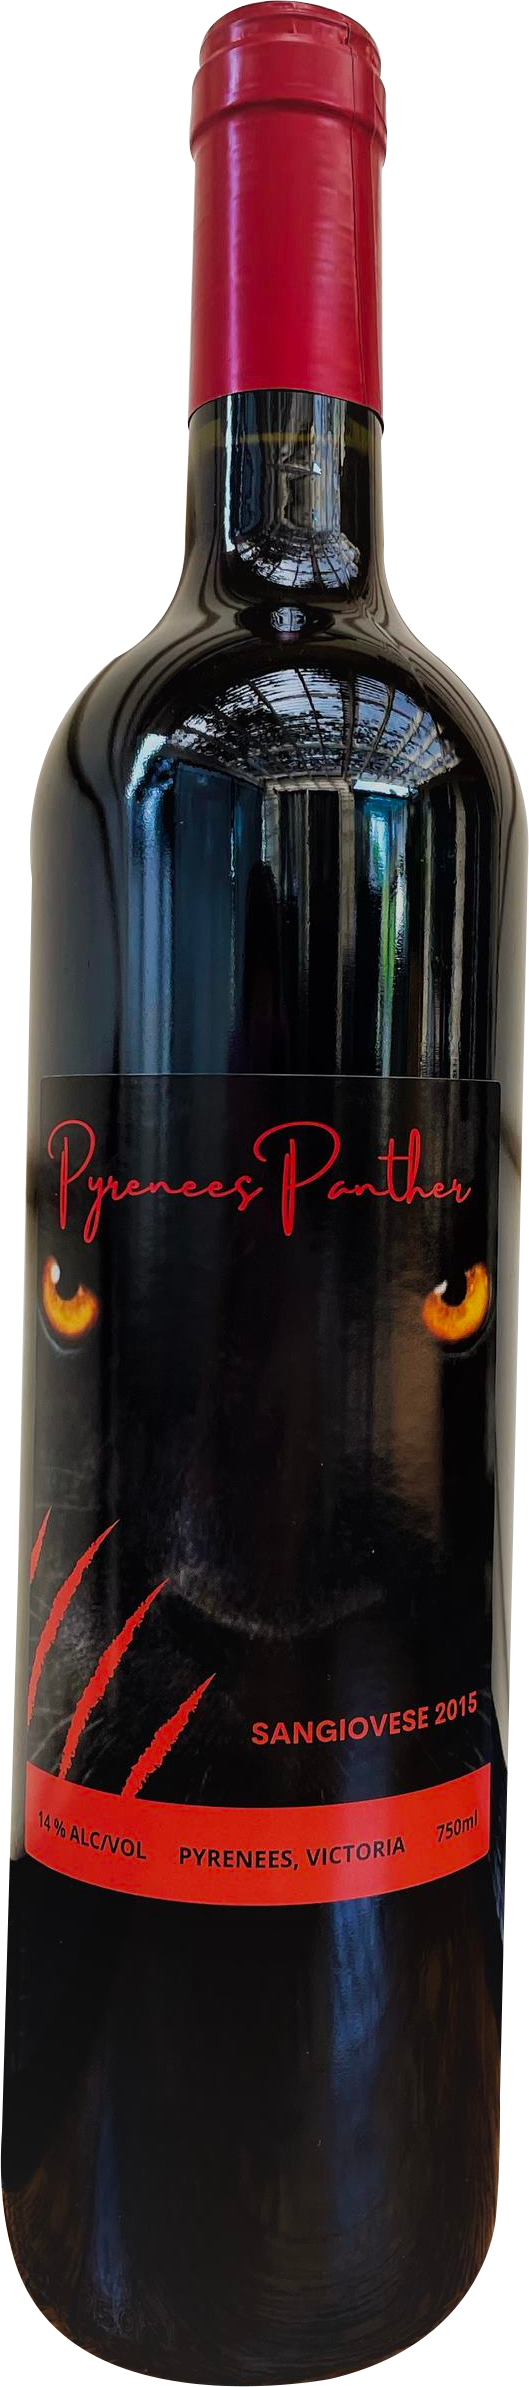 Pyrenees Panther- Sangiovese 2015- WHOLESALE ONLY (Contact us for a quote)